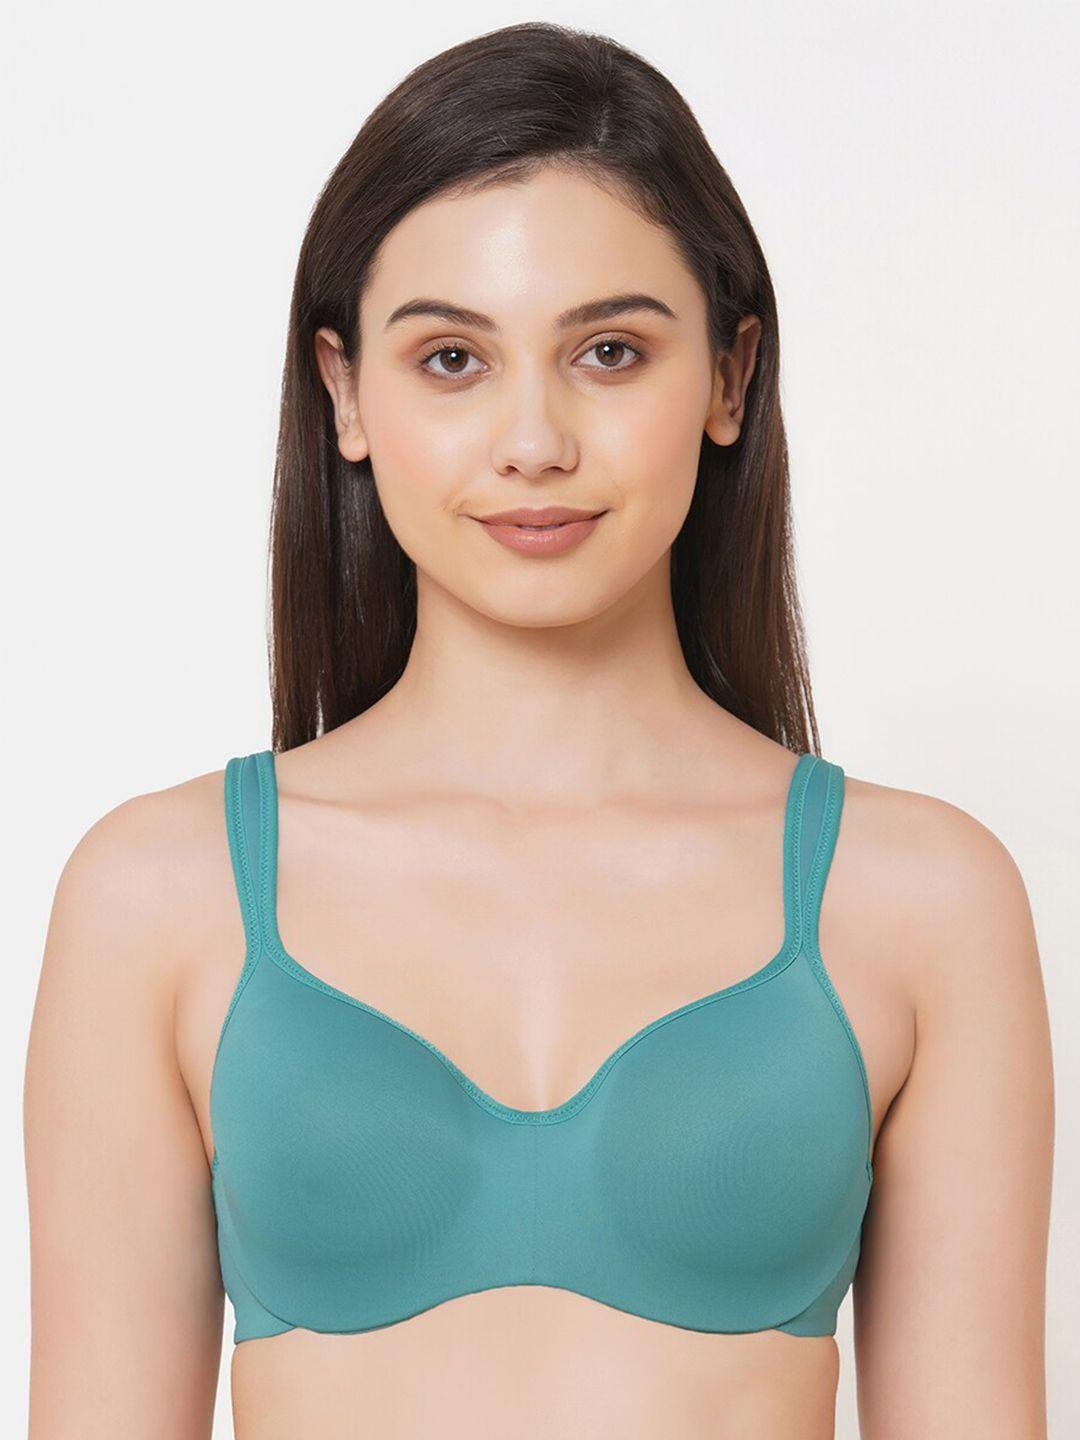 soie-teal-blue-underwired-lightly-padded-bra-cb-130teal